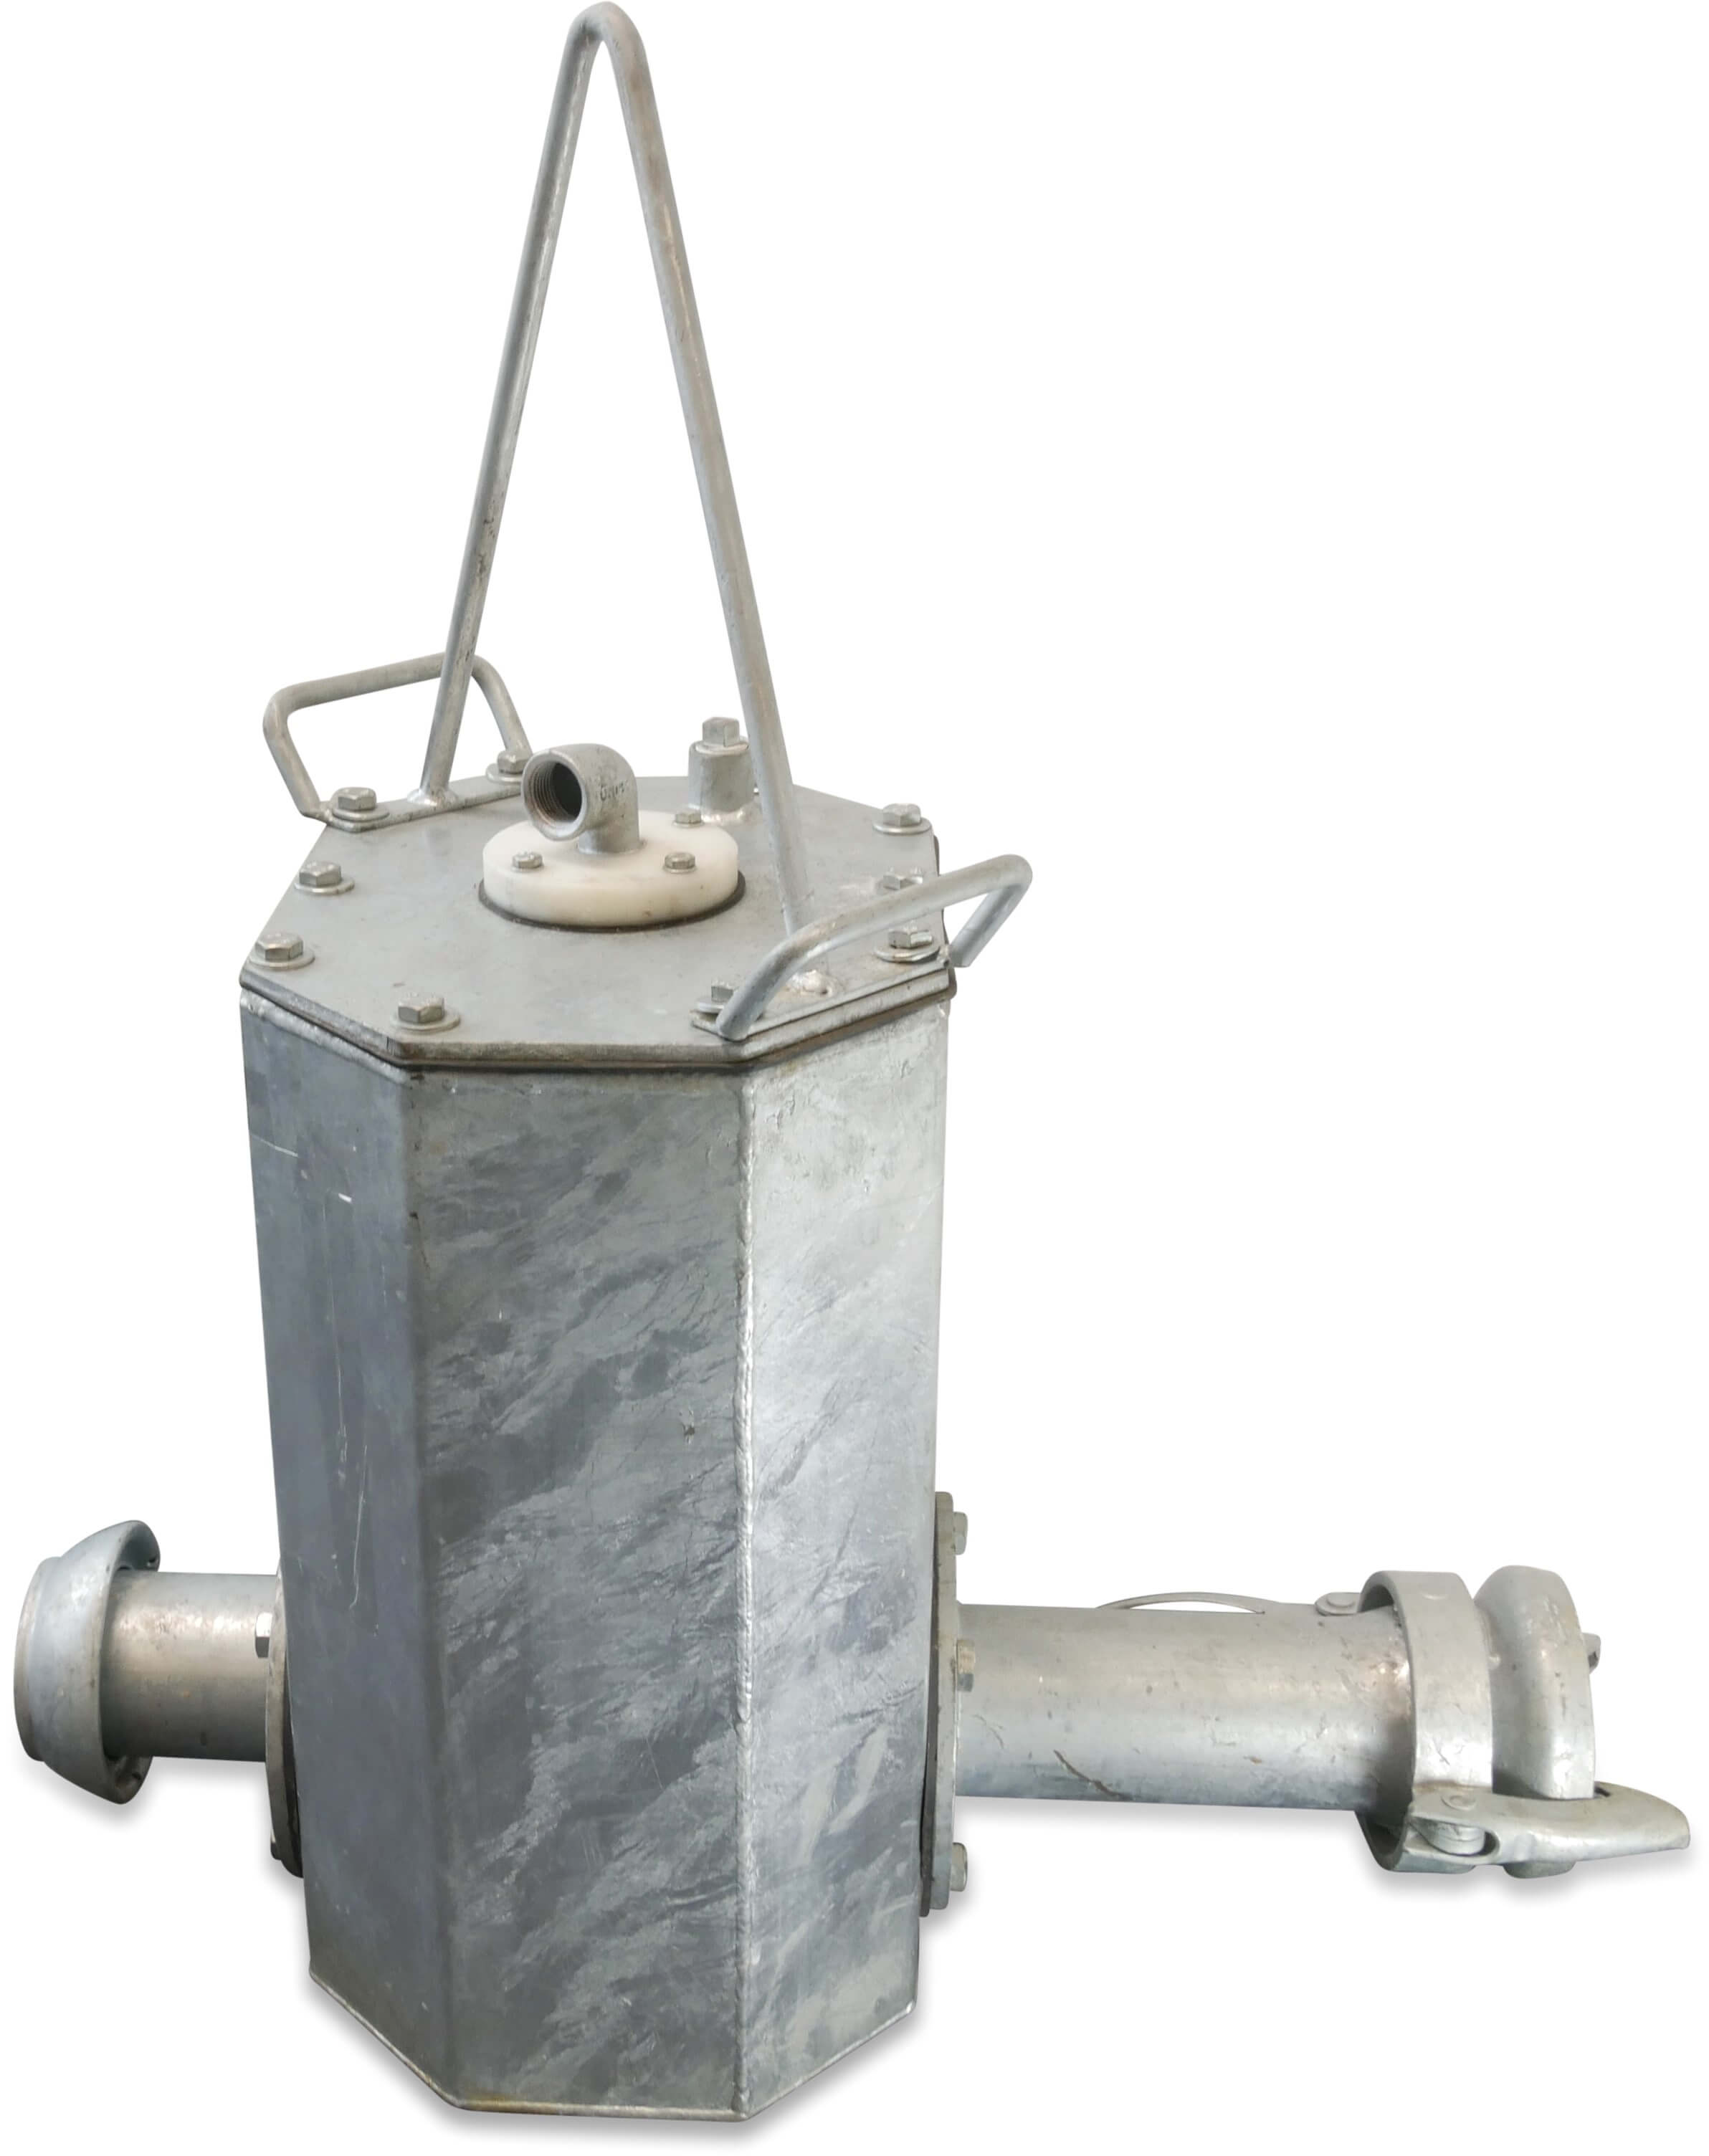 De-aeration unit with quick couplers steel galvanised 108 mm female part Perrot x male part Perrot